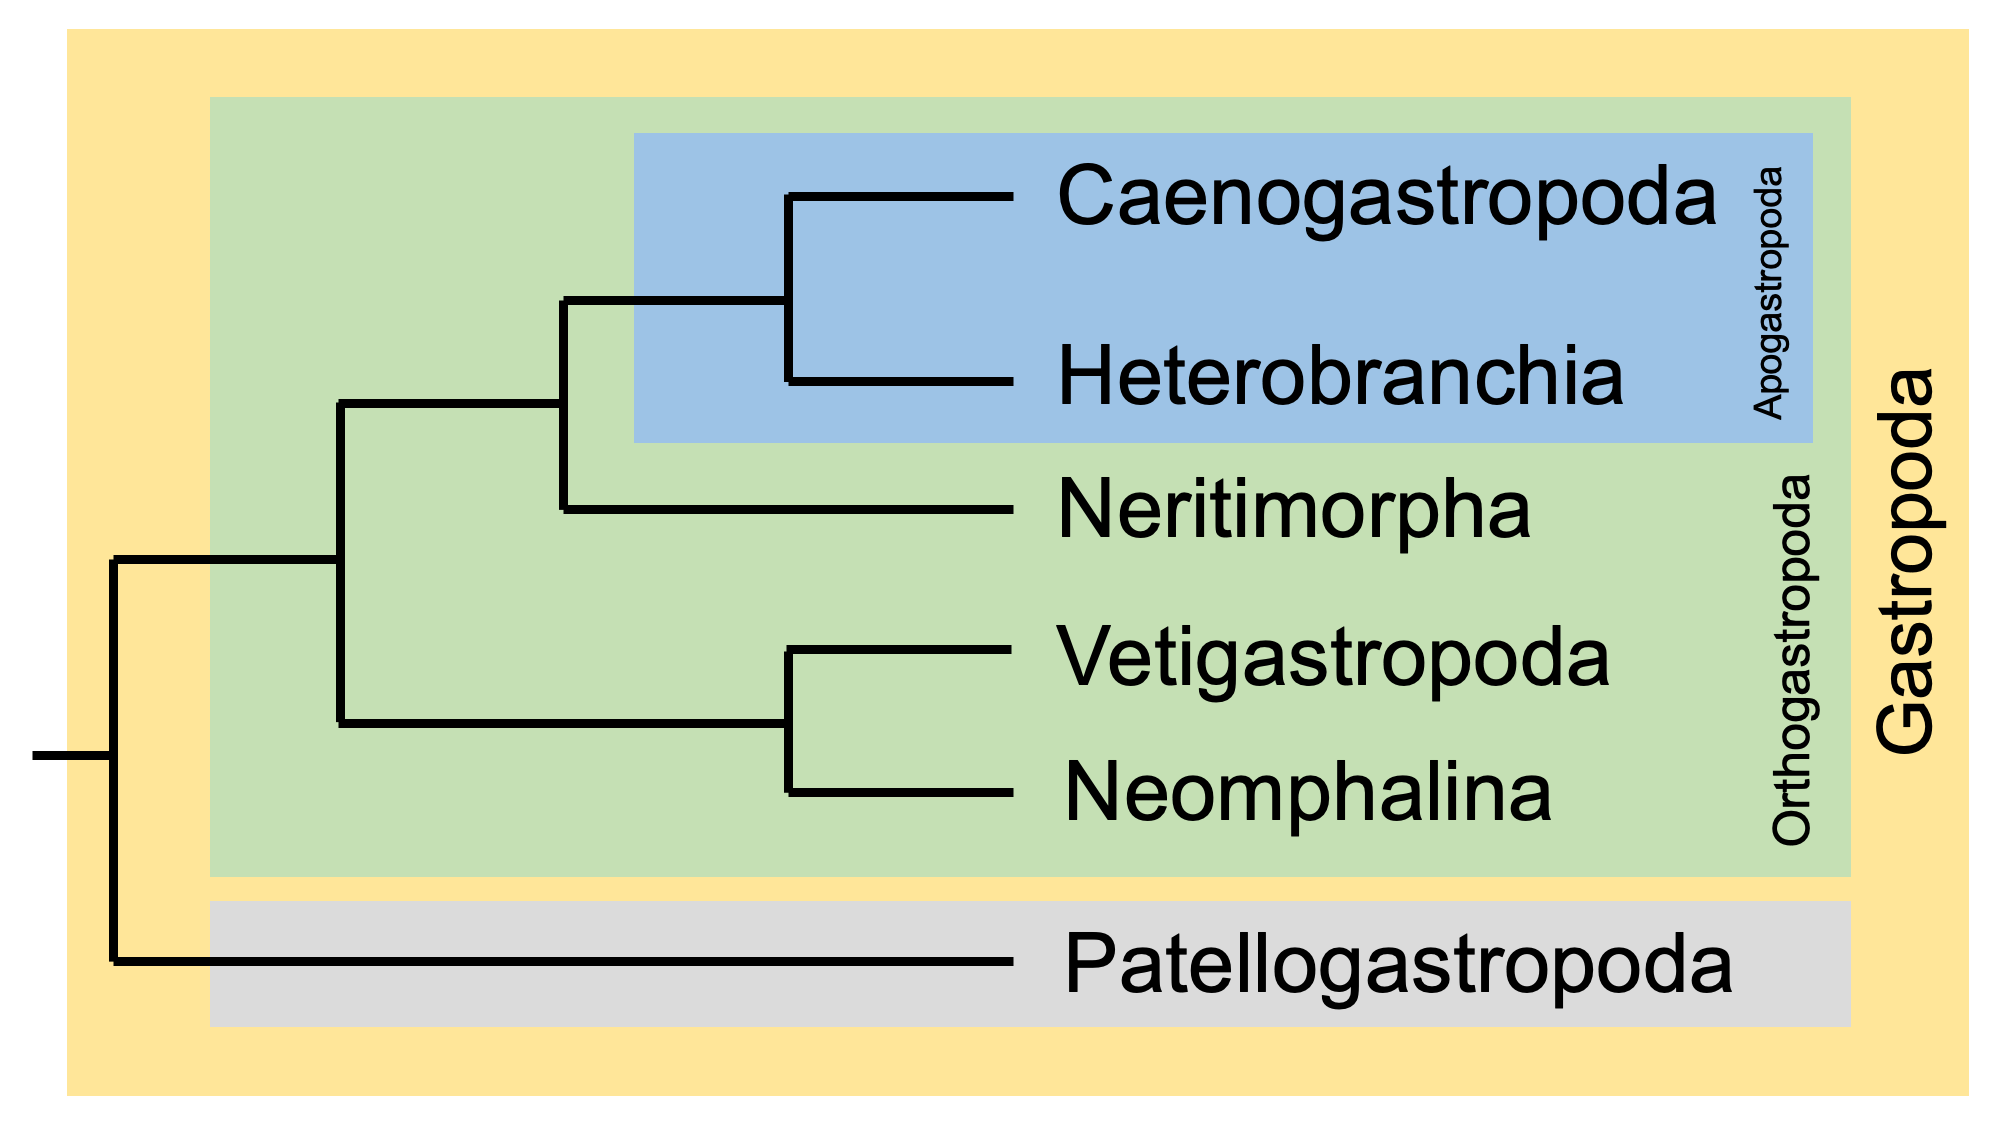 Diagram showing a phylogenetic hypothesis for modern gastropod clades.